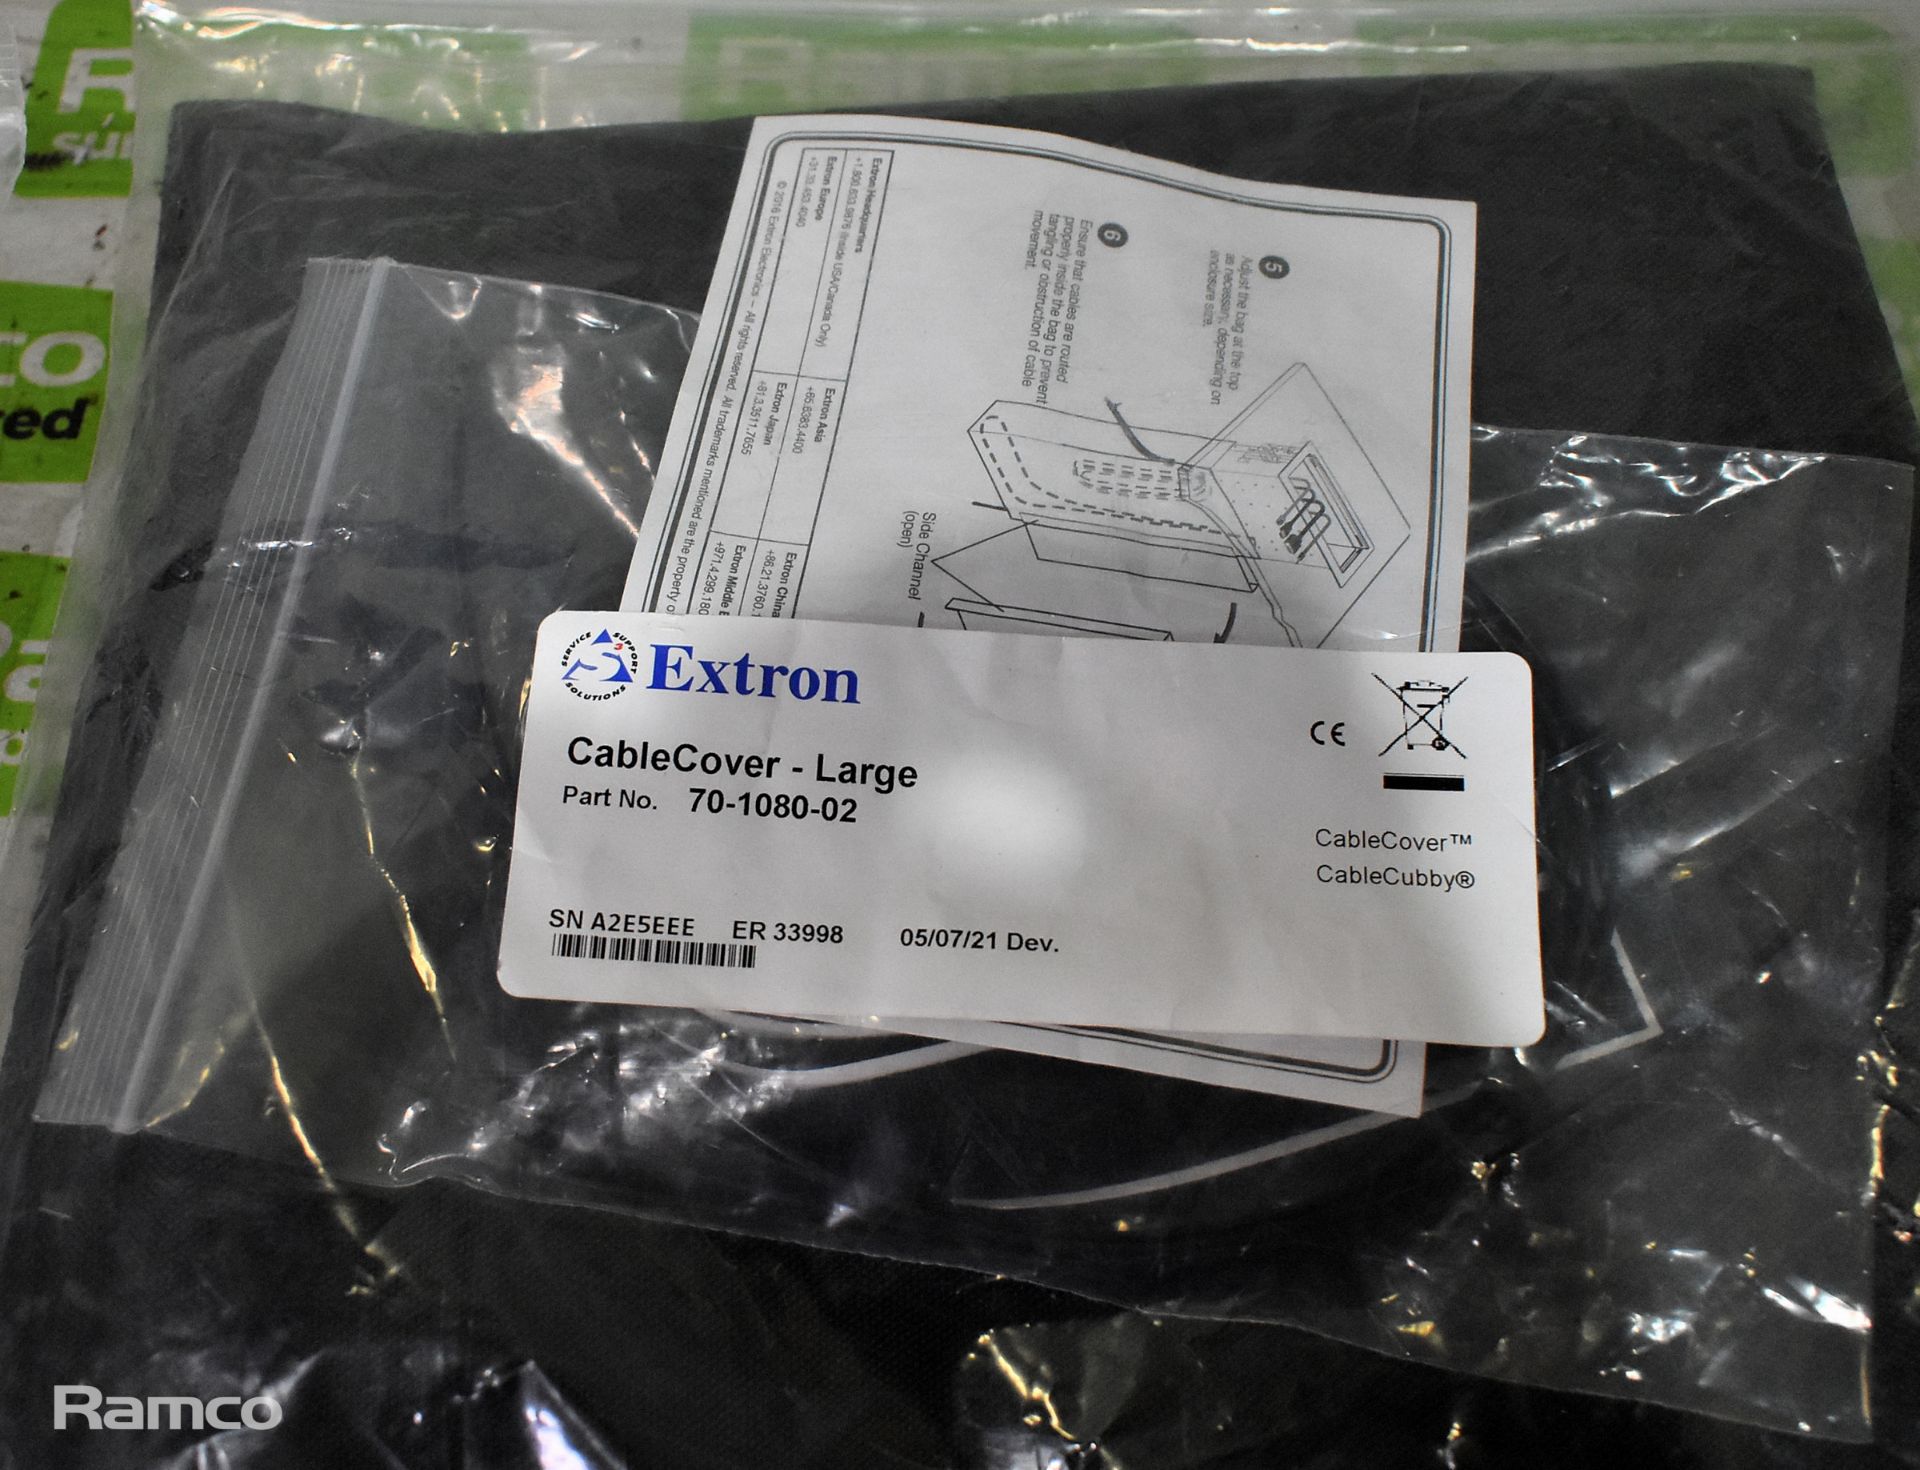 3x Extron large cable covers & 17x Extron small cable covers - Image 5 of 7